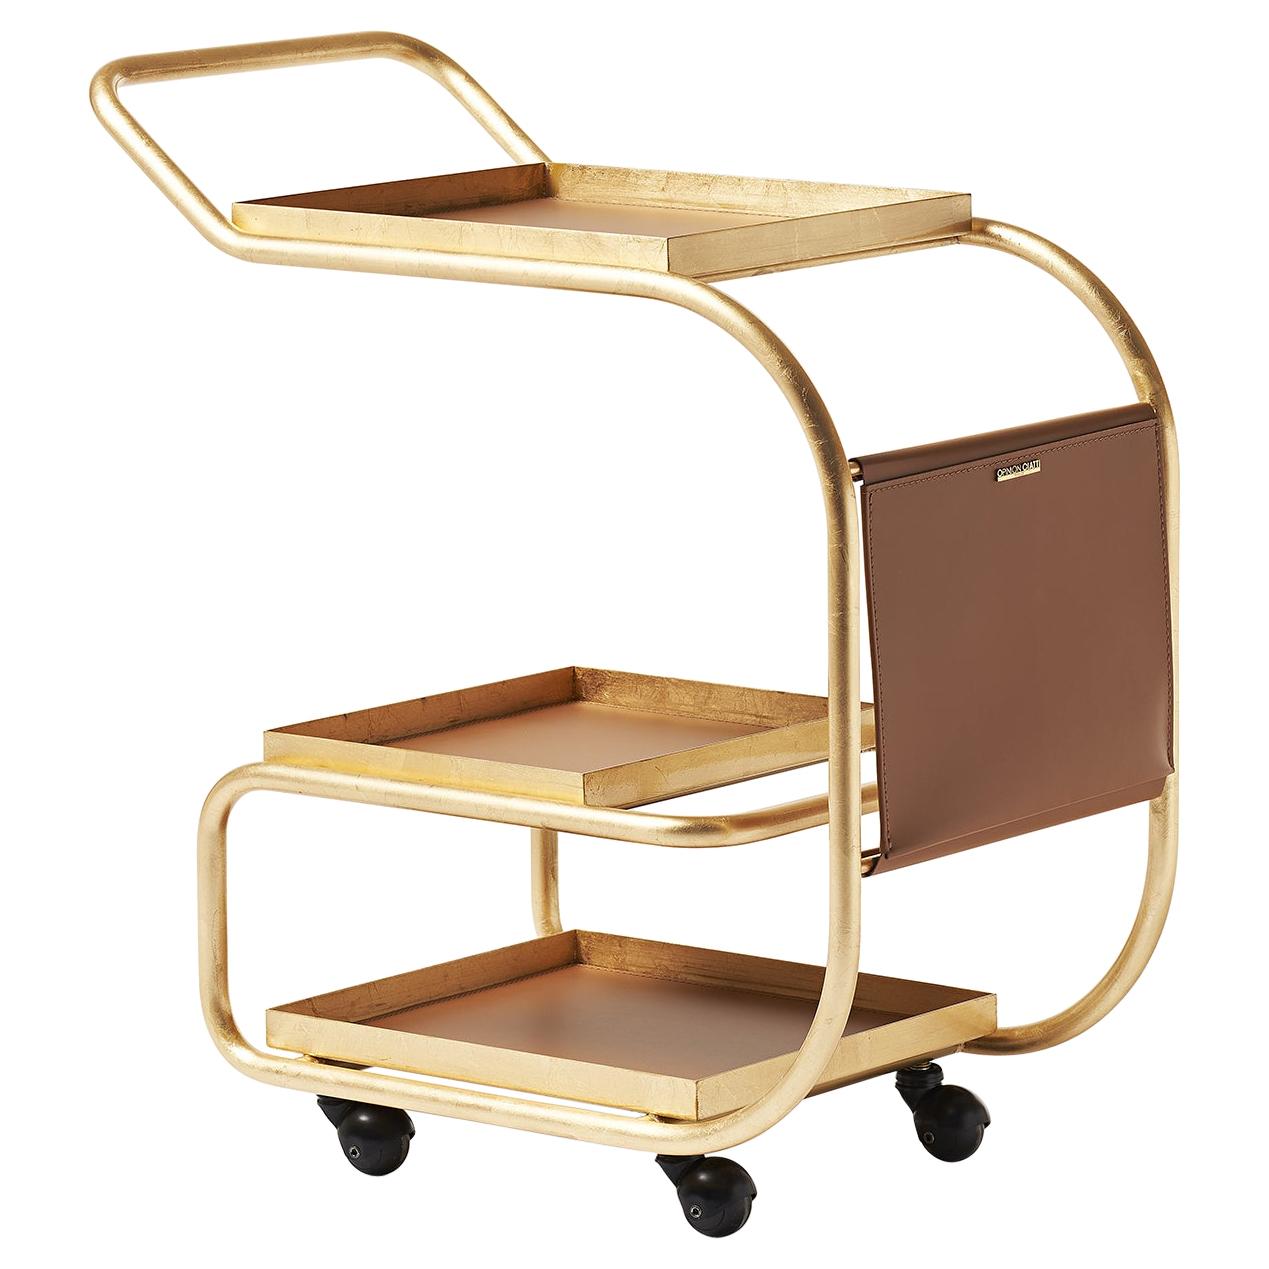 Zenzero Trolley in Glossy Gold Structure with Leather Finish by Samer Alameen For Sale